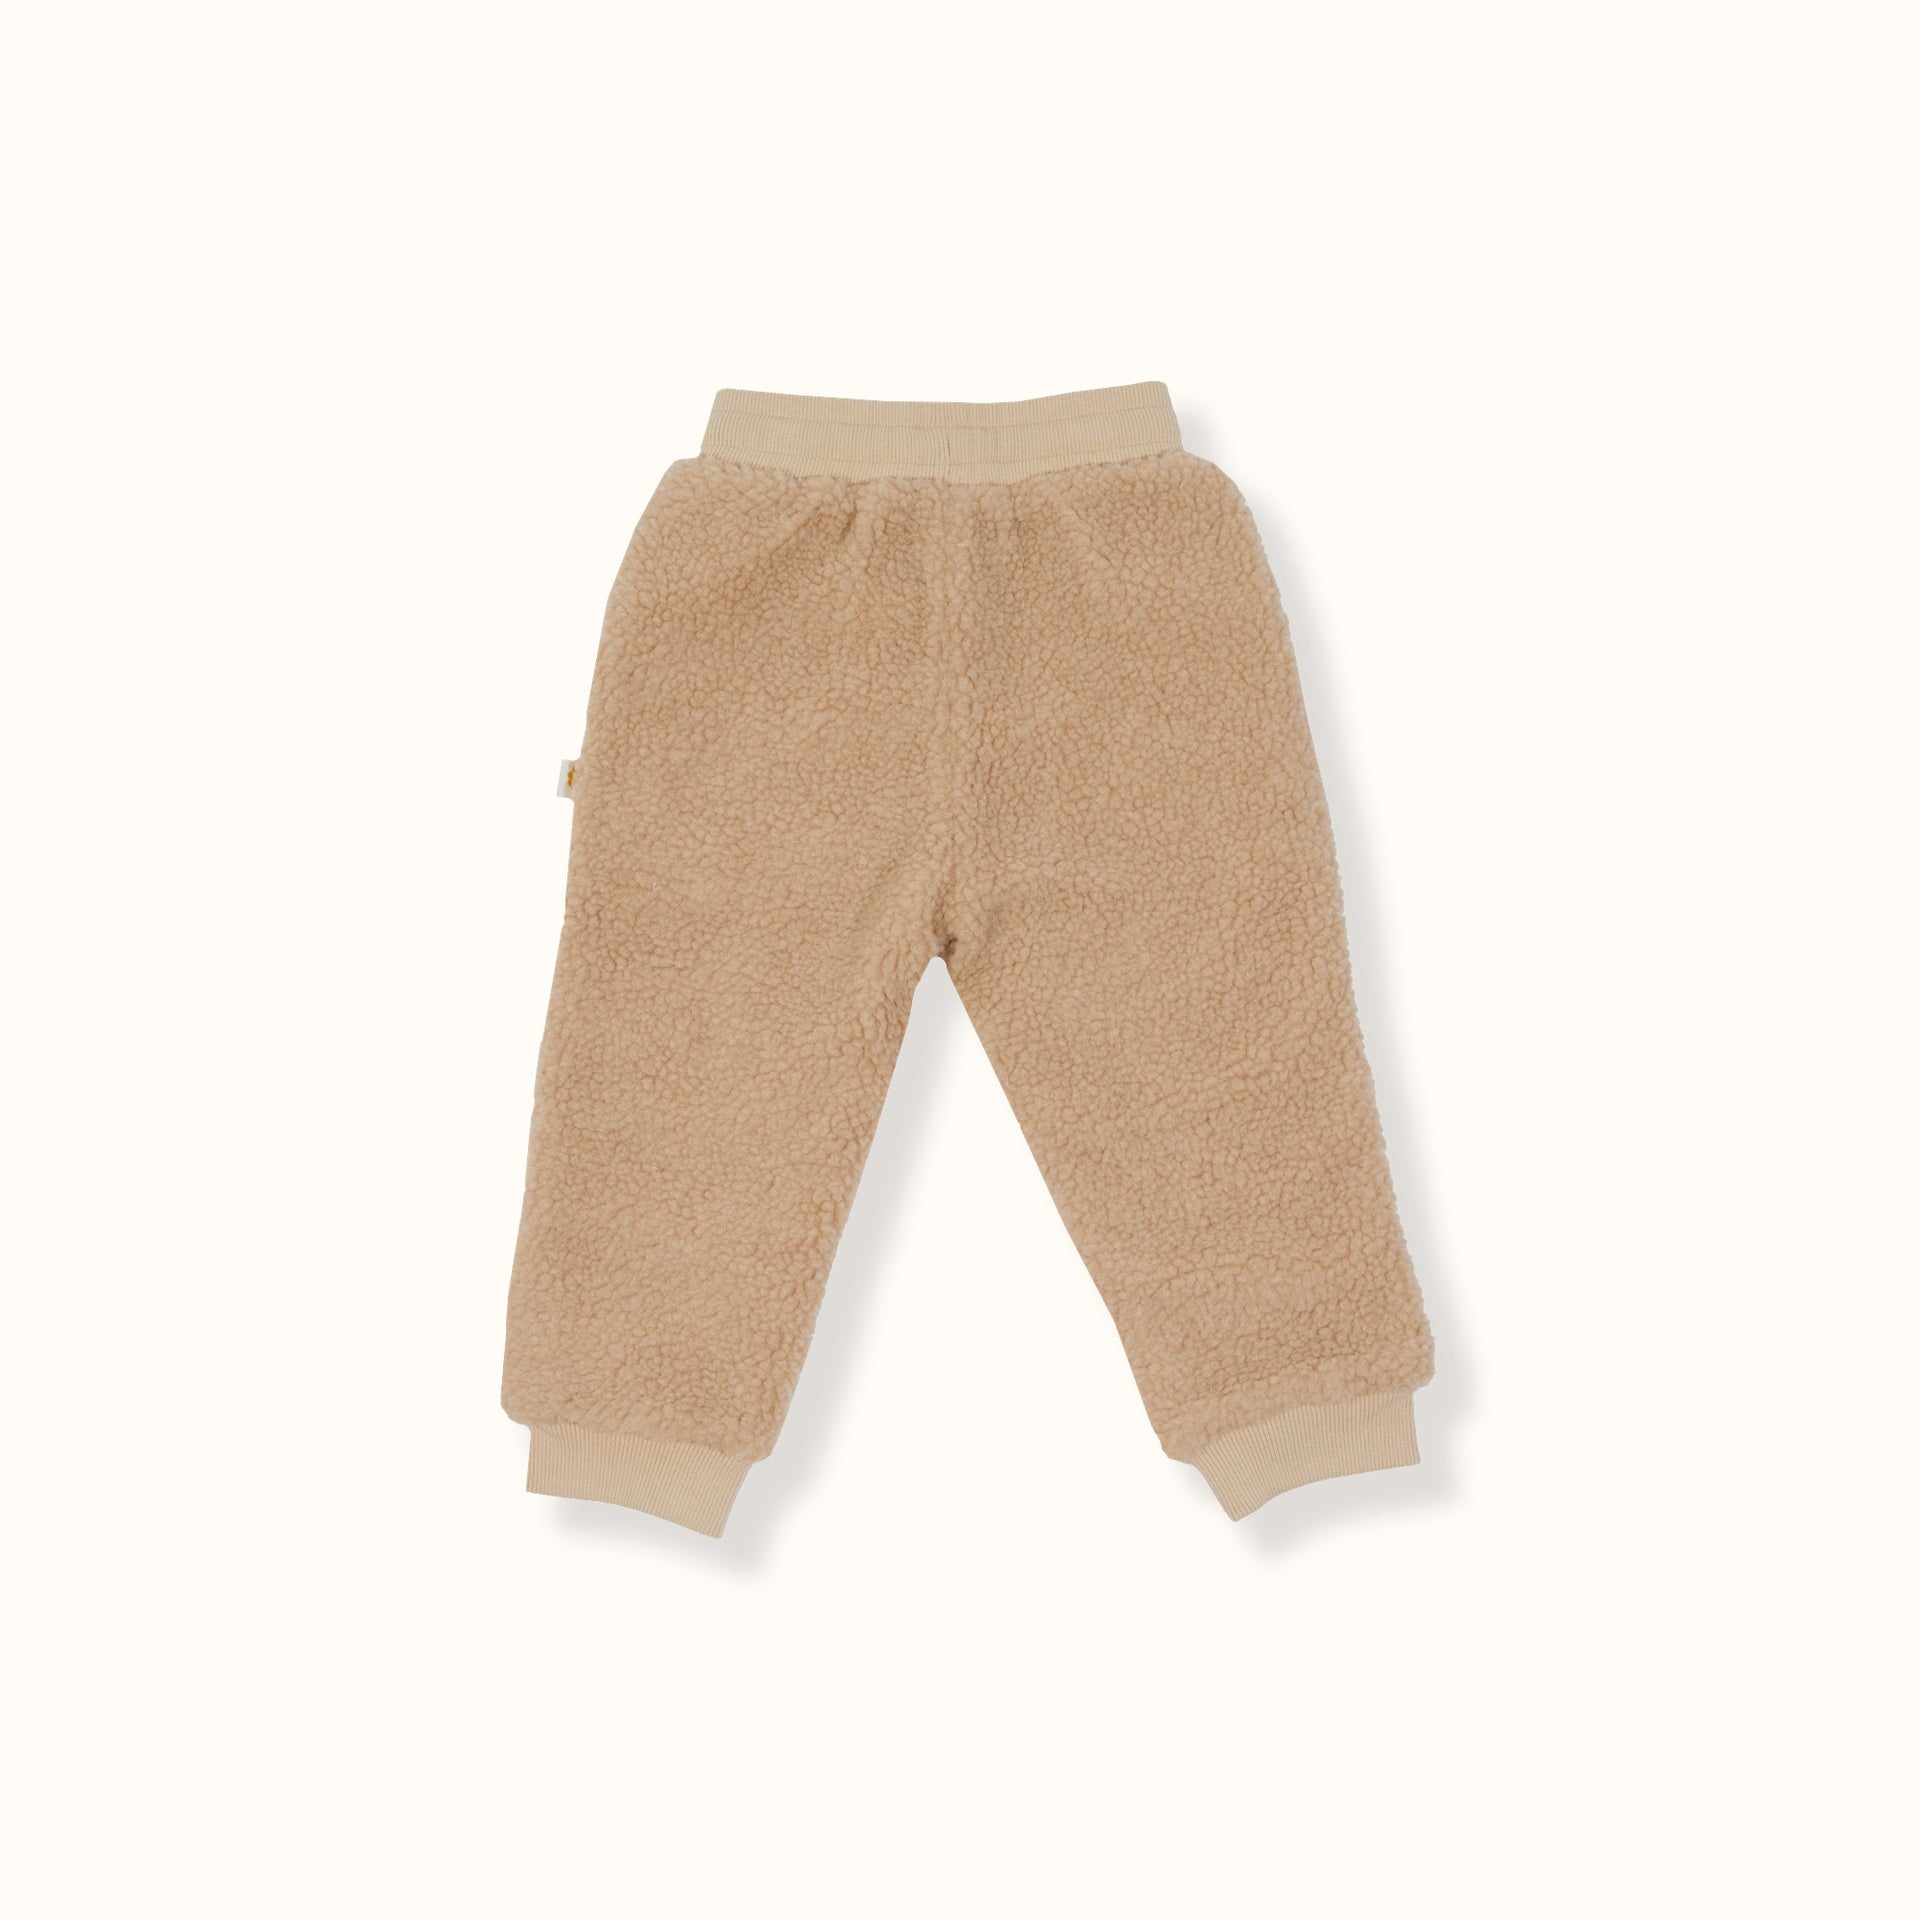 Goldie & Ace - Clubhouse Teddy Jogger - Sand